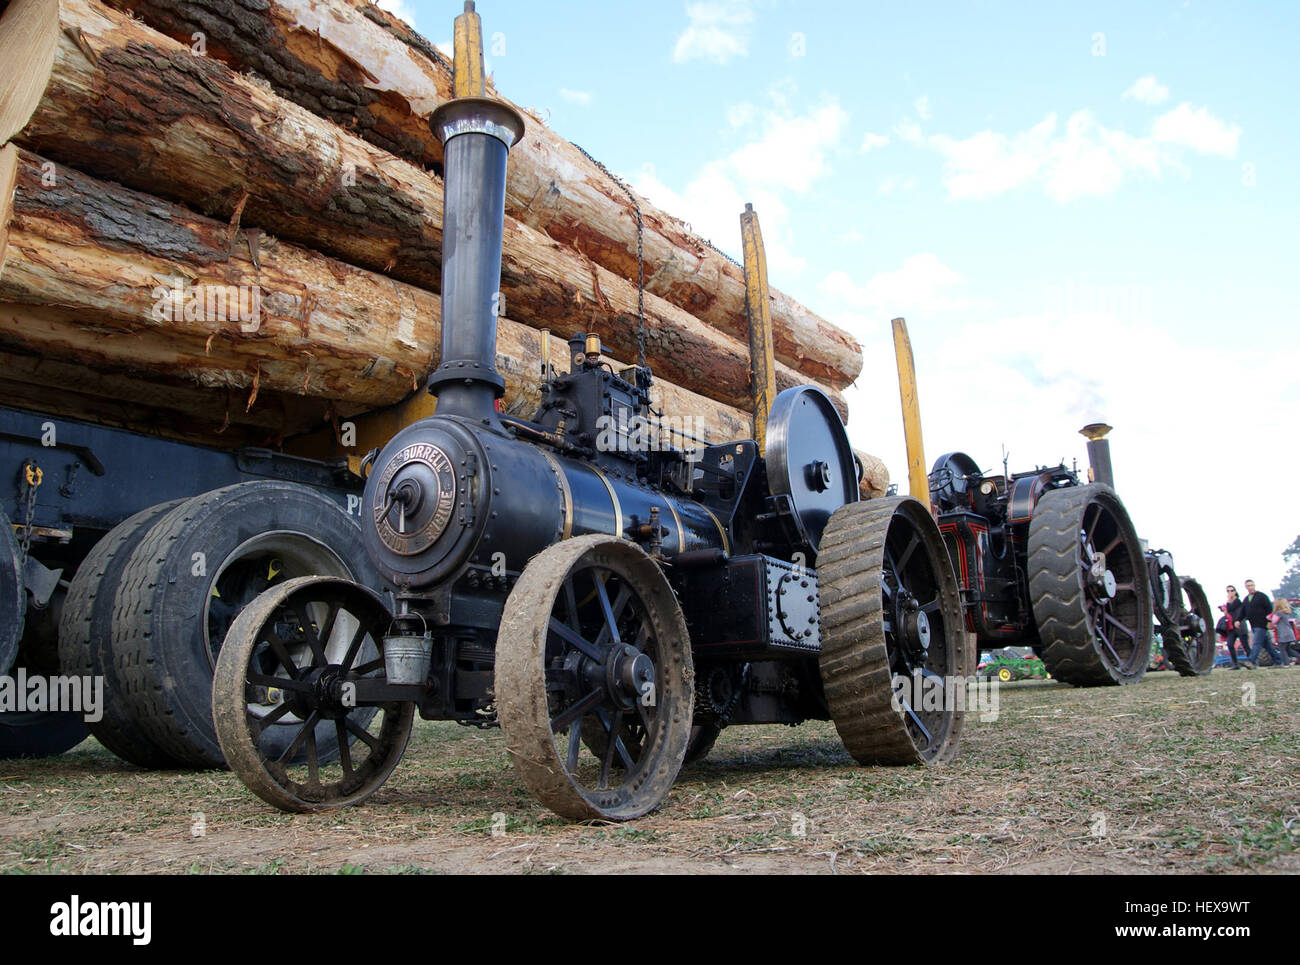 ,,Burrell  Traction EngineSteam engines,Old style farming,Steam driven Engines,Steam road vehicles,Traction engine rallys,Vintage  Machinery Displays Stock Photo